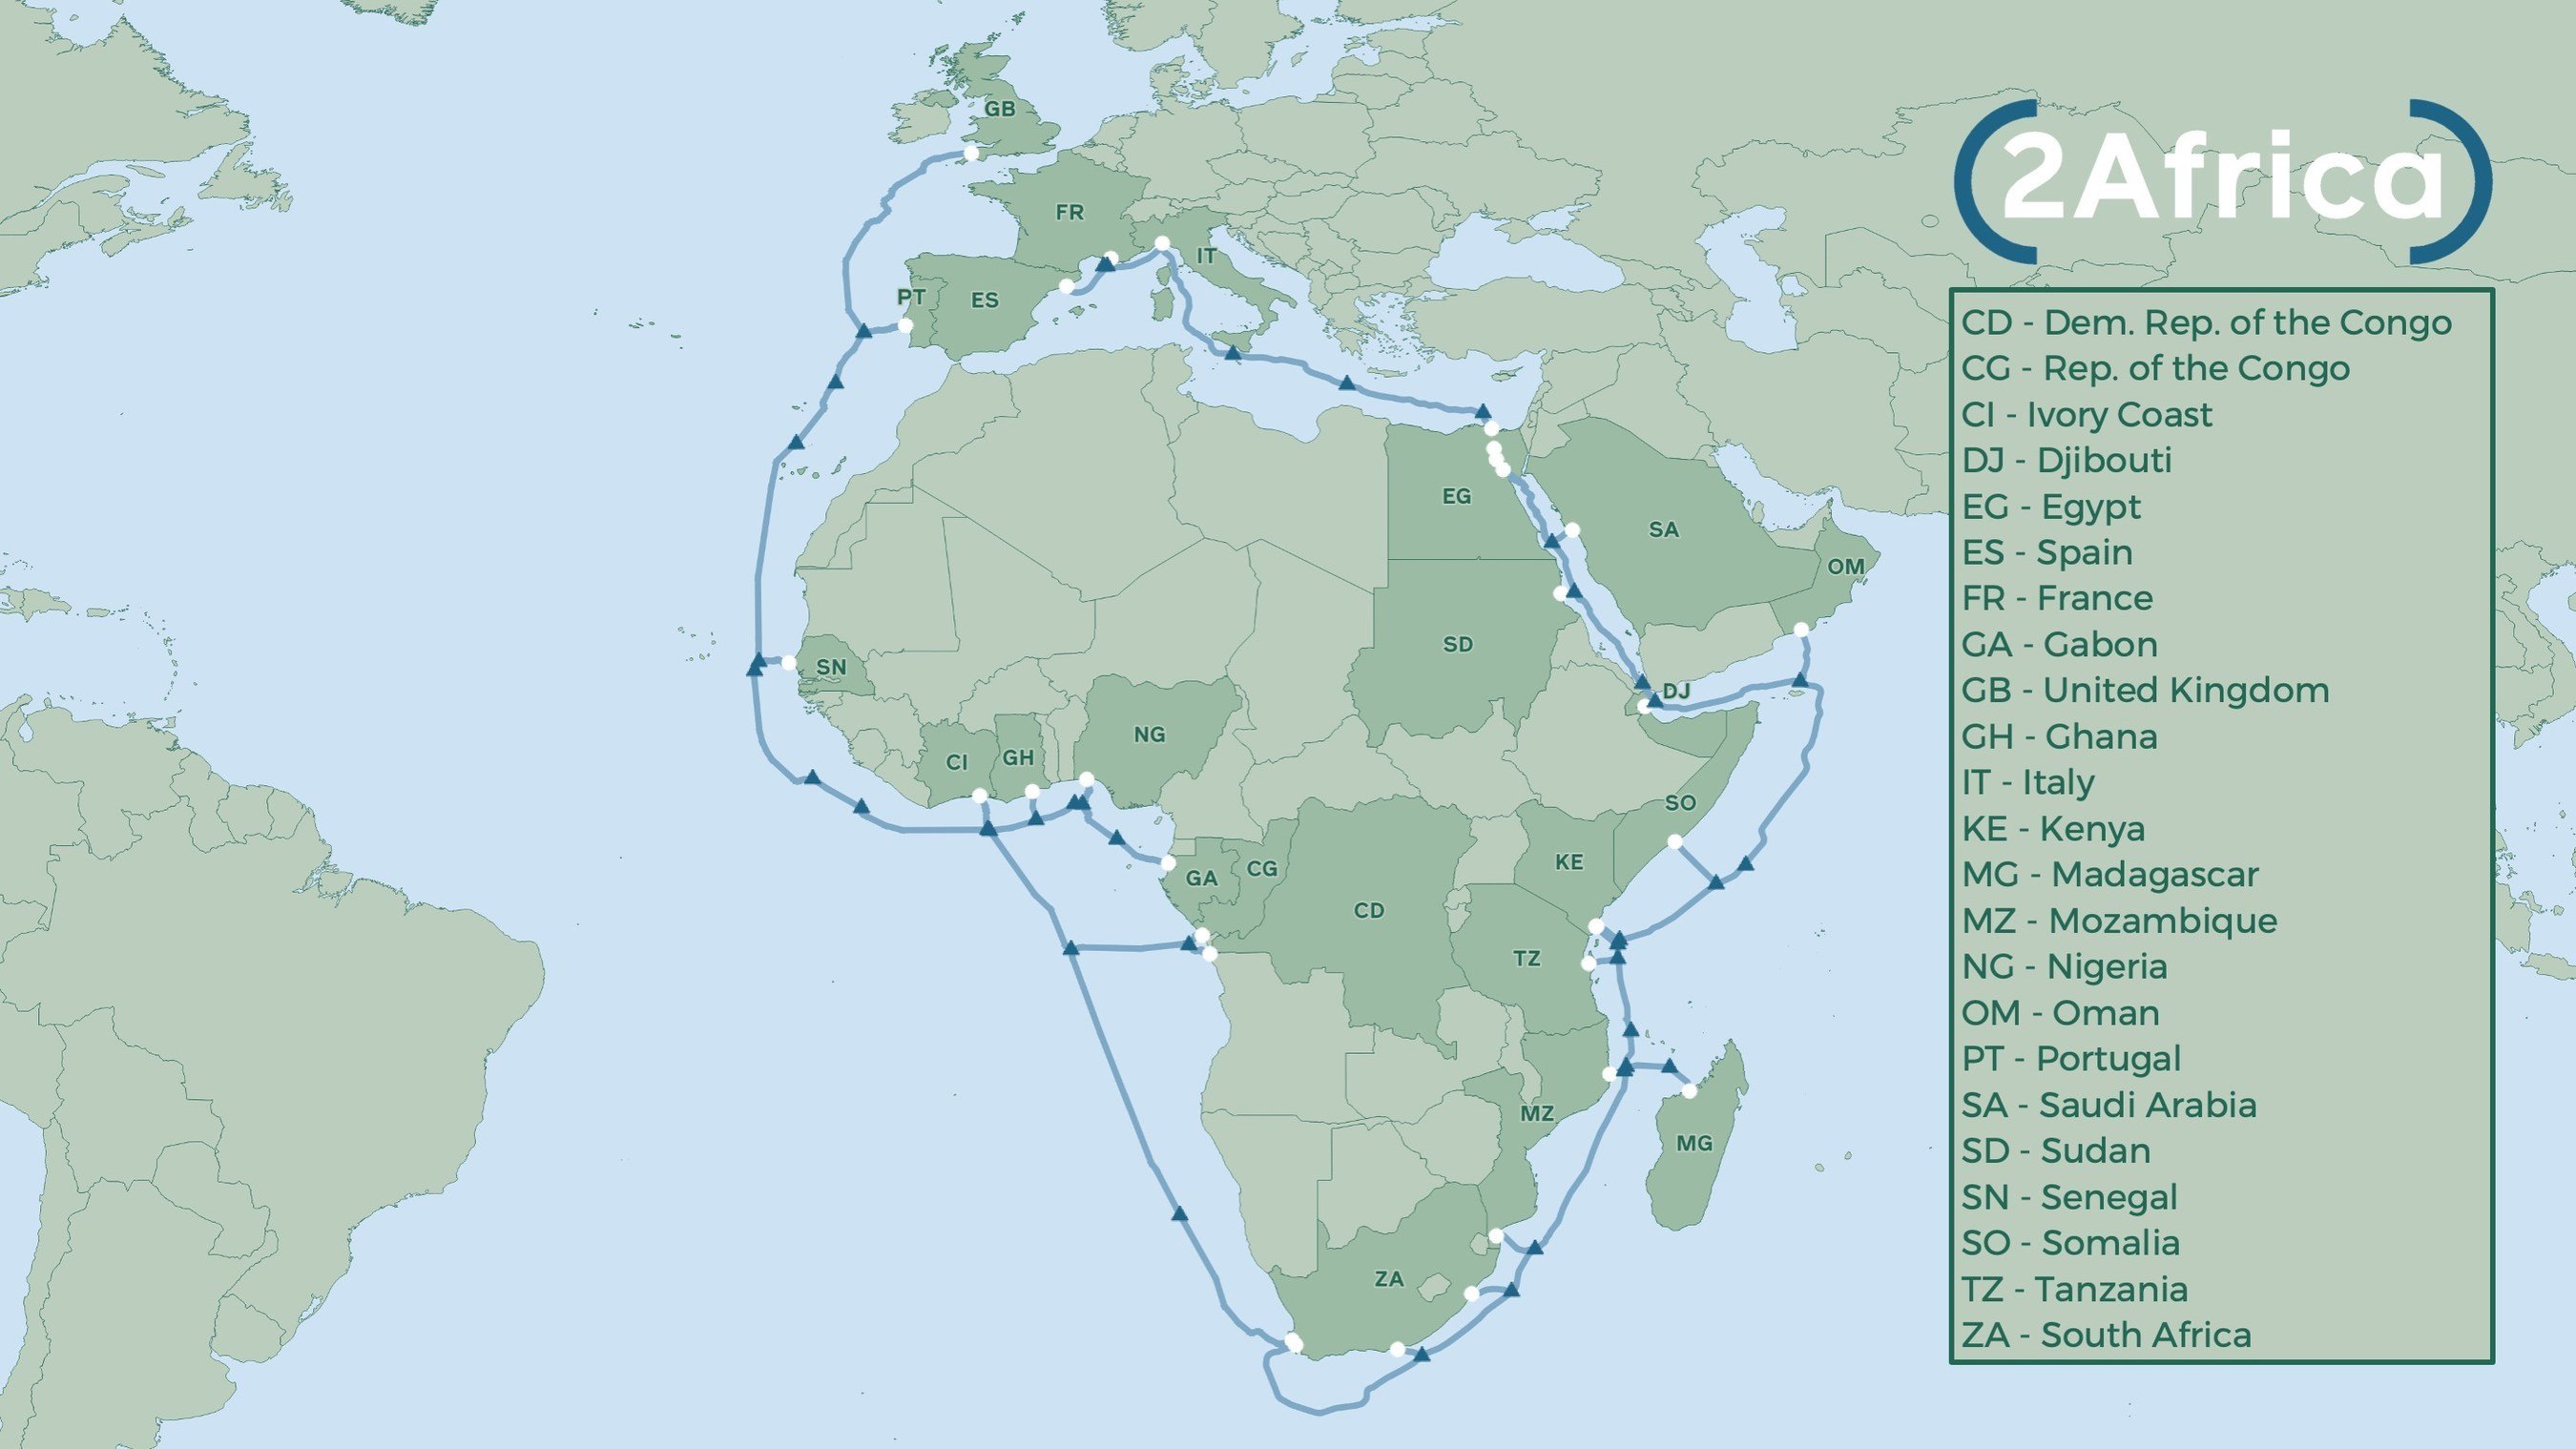 Source_2Africa_subsea_cable_www.prnewswire.com